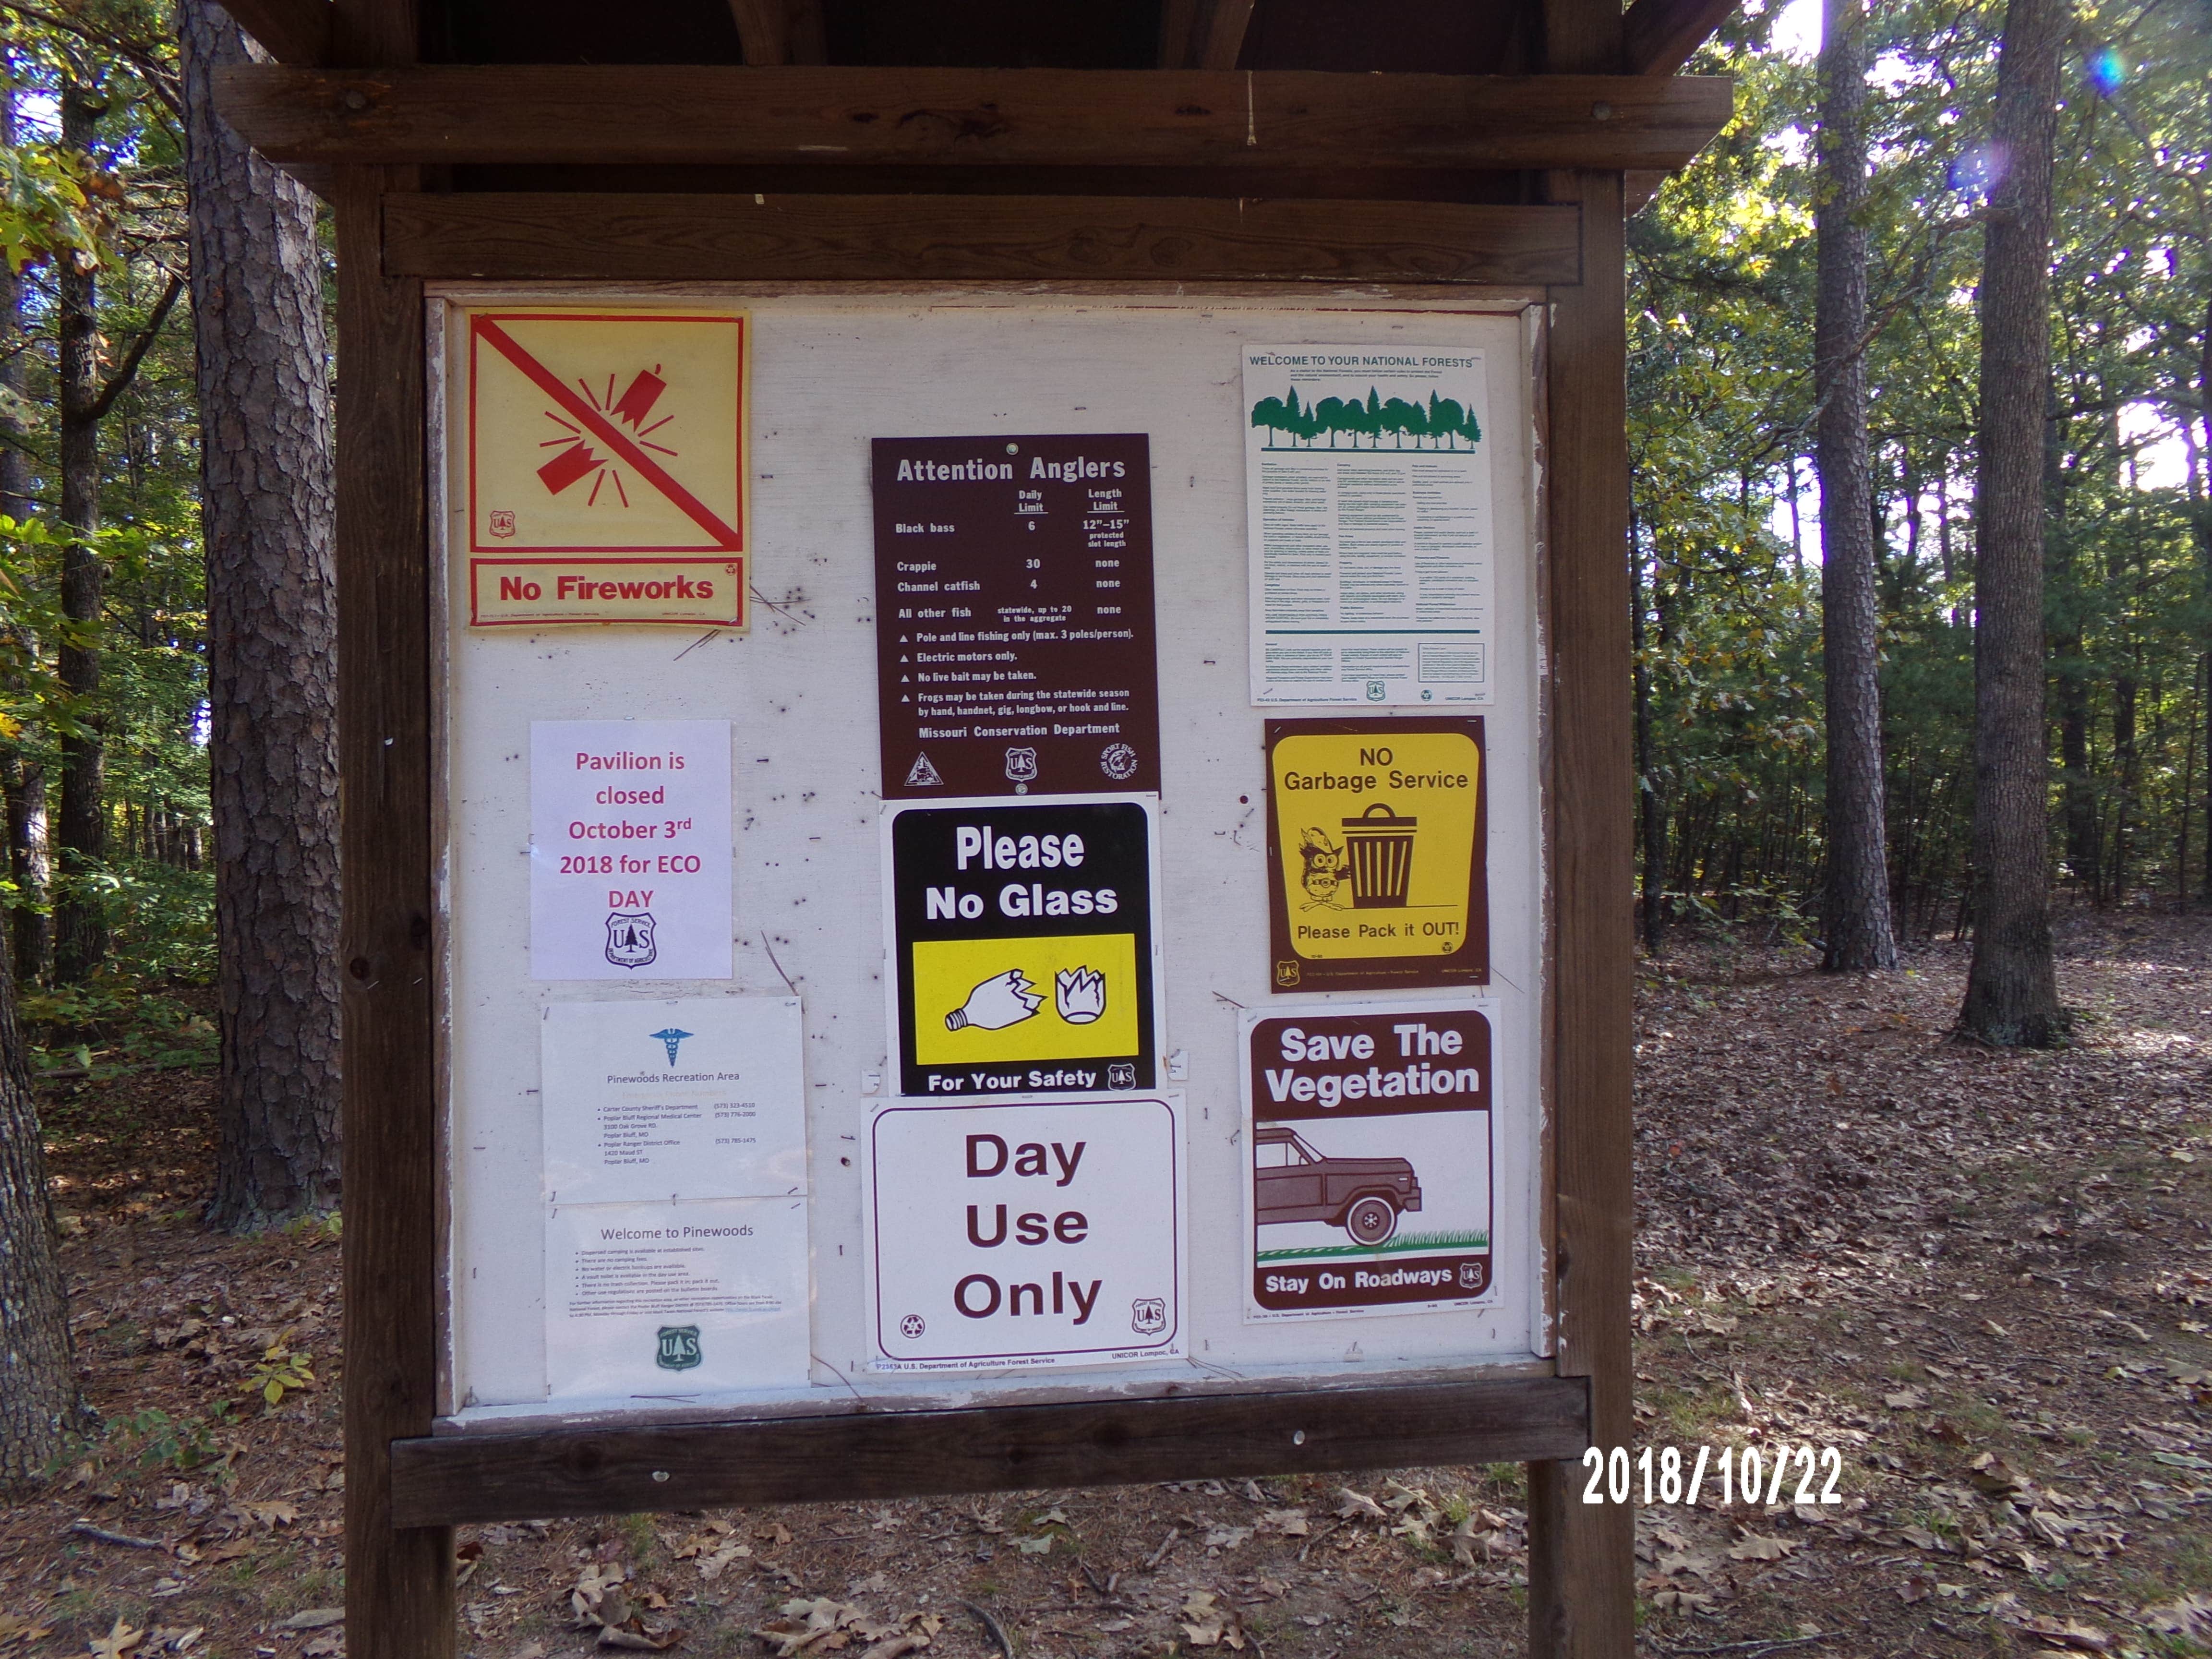 Picnic area sign, camping in campground only in same park.